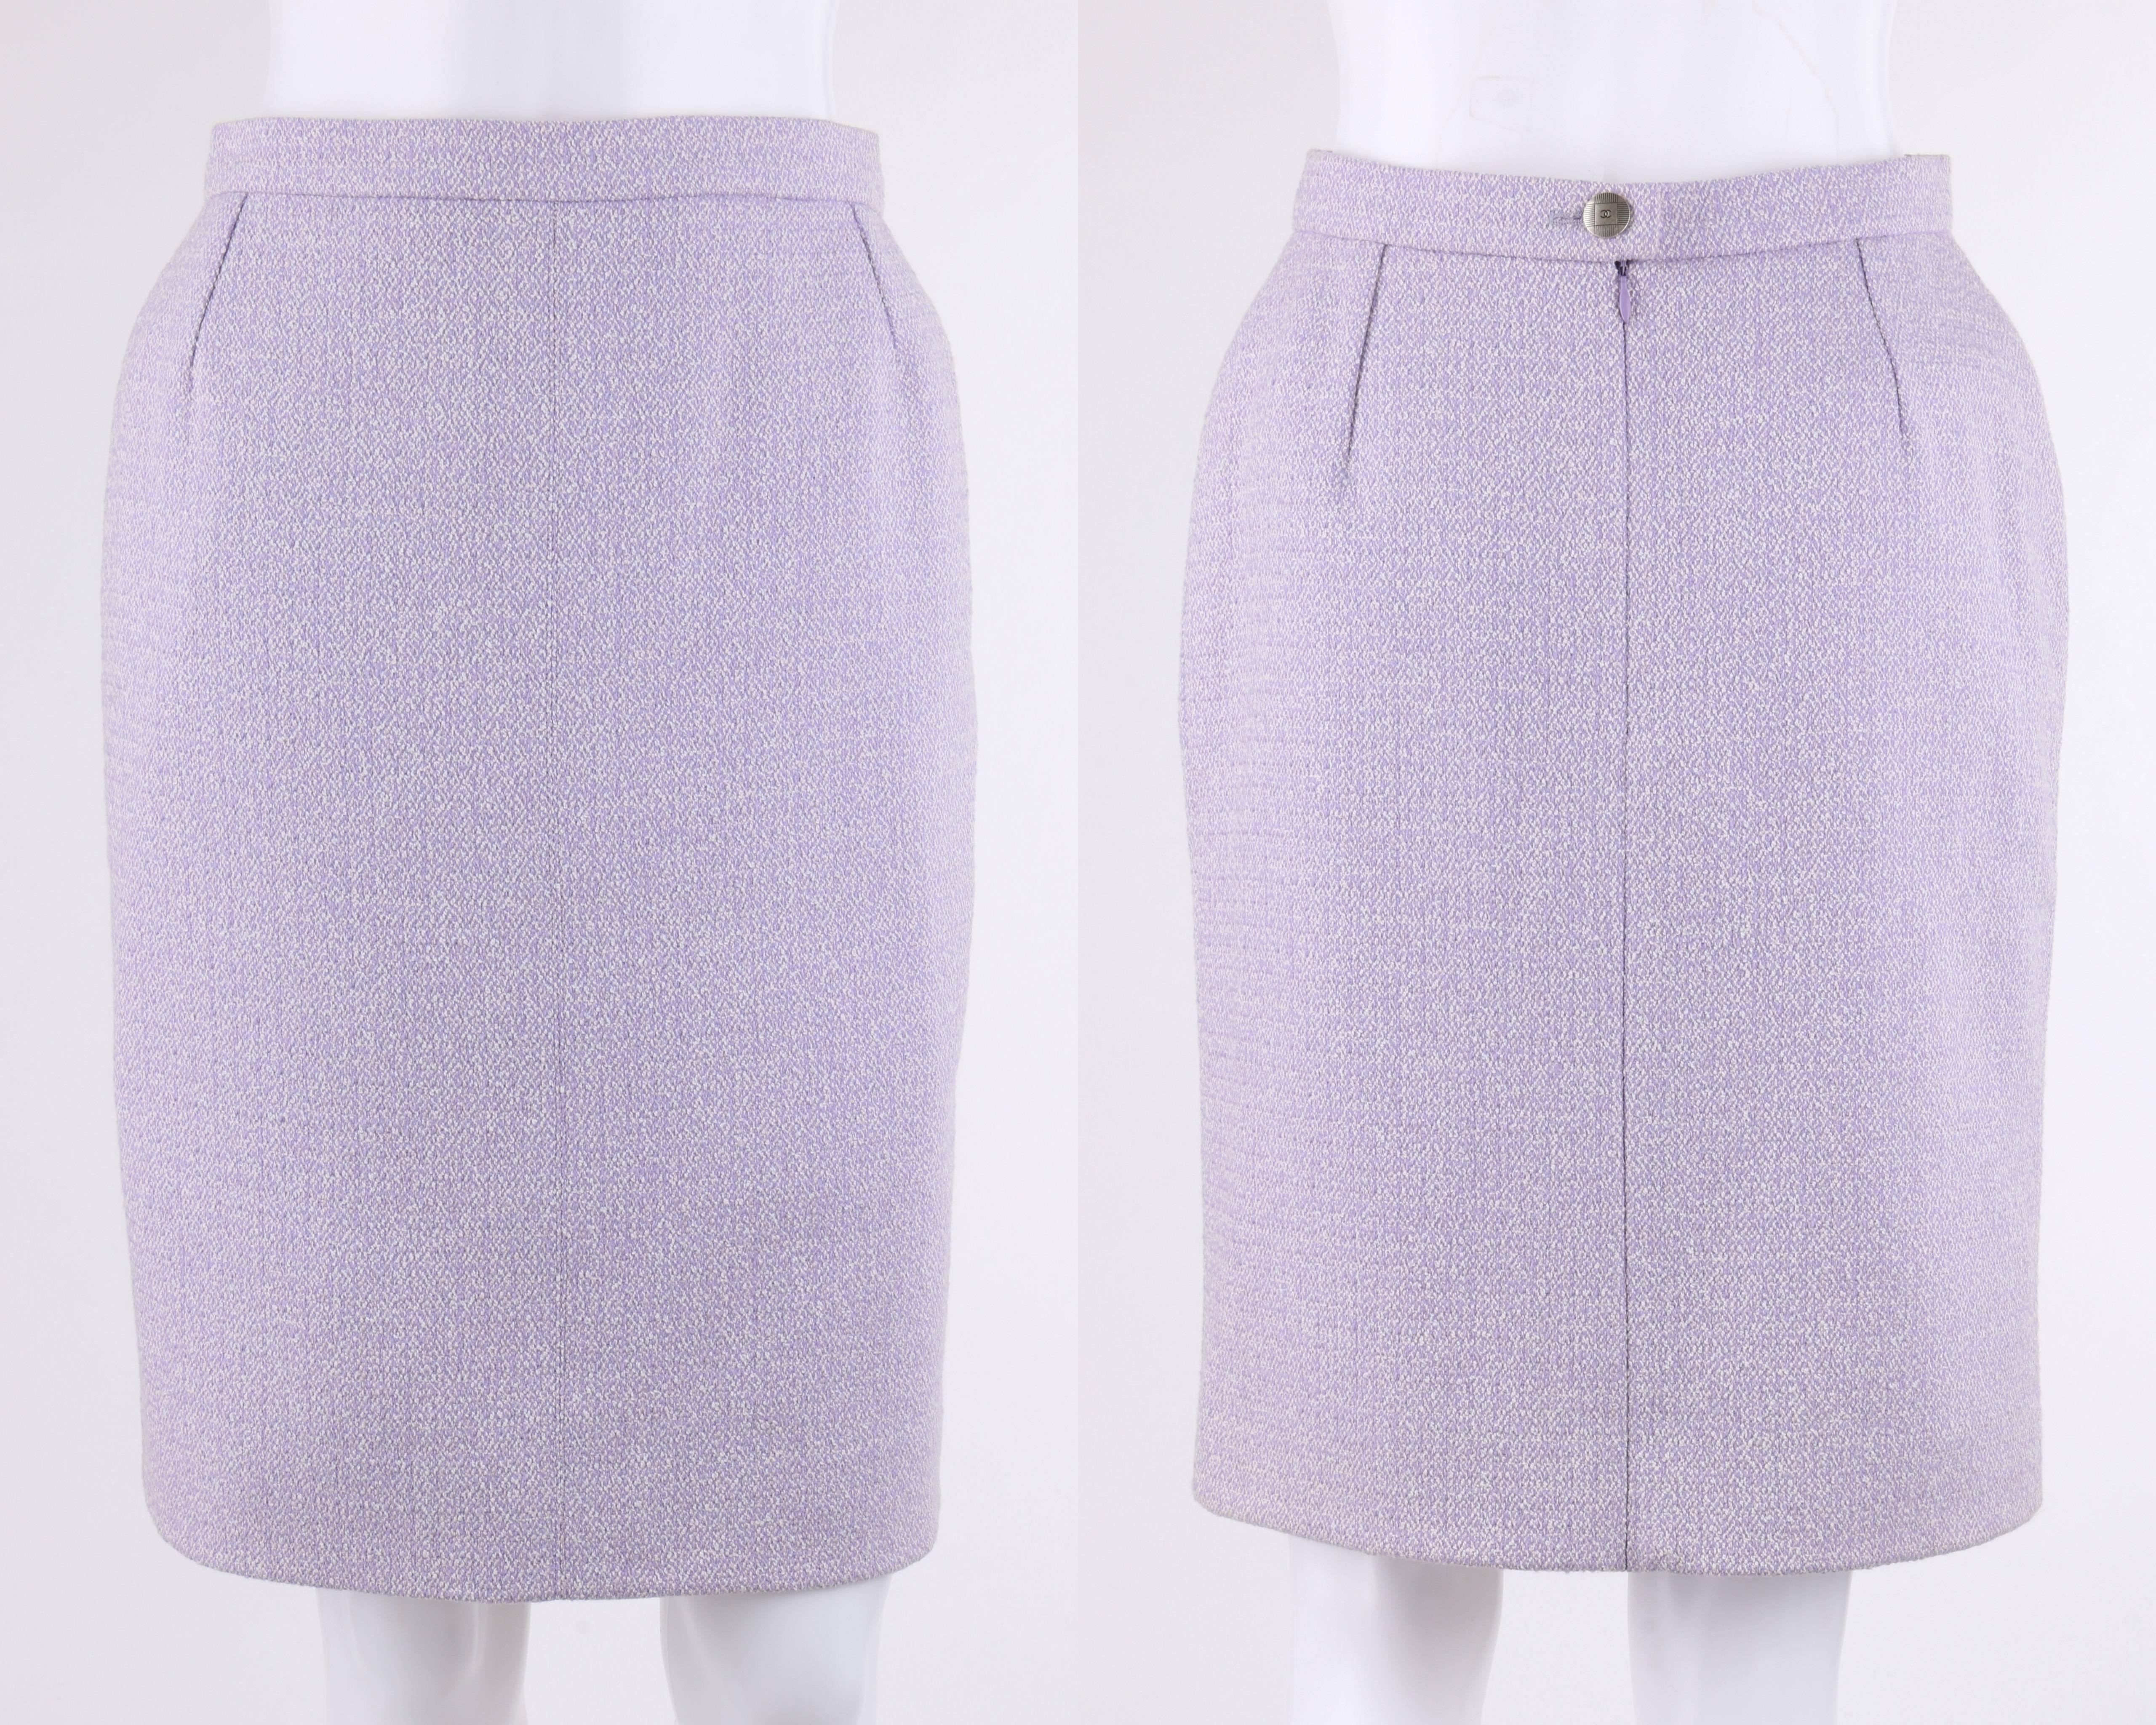 Gray CHANEL S/S 1998 2 Pc Classic Lilac & White Wool Tweed Suit Blazer Skirt Set 40